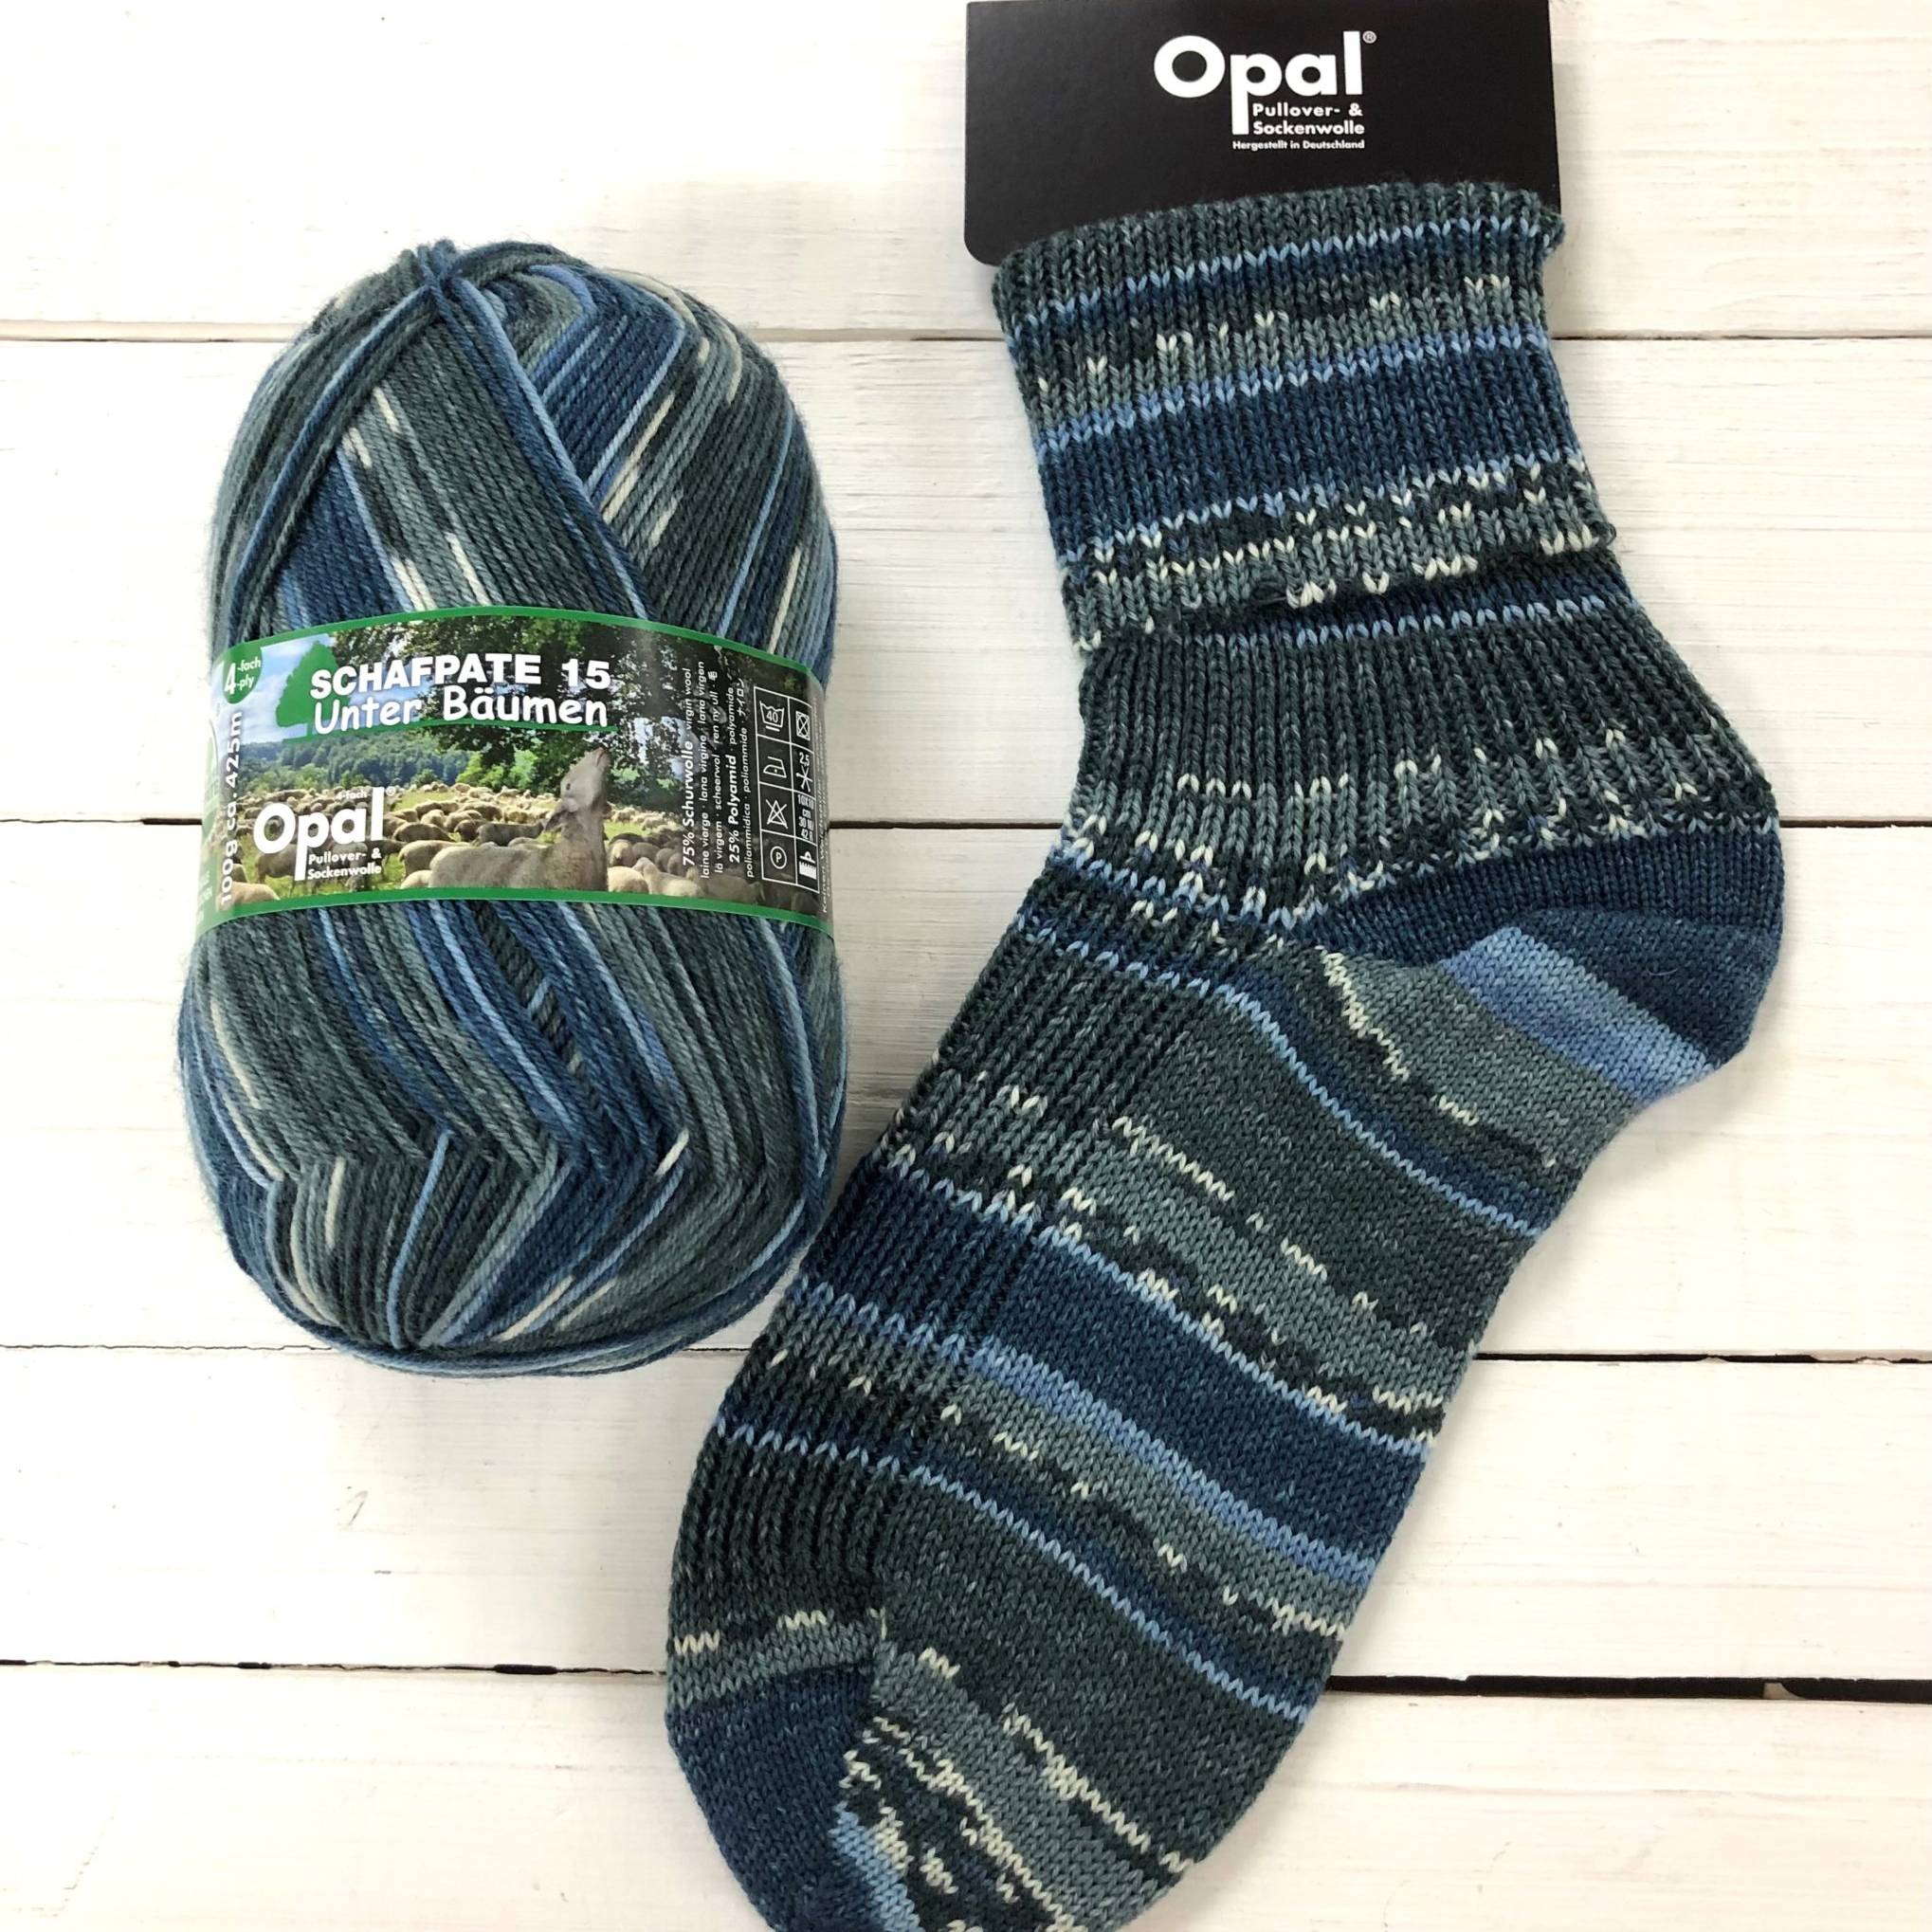 Opal Schafpate 4-Ply - Shade (11362)